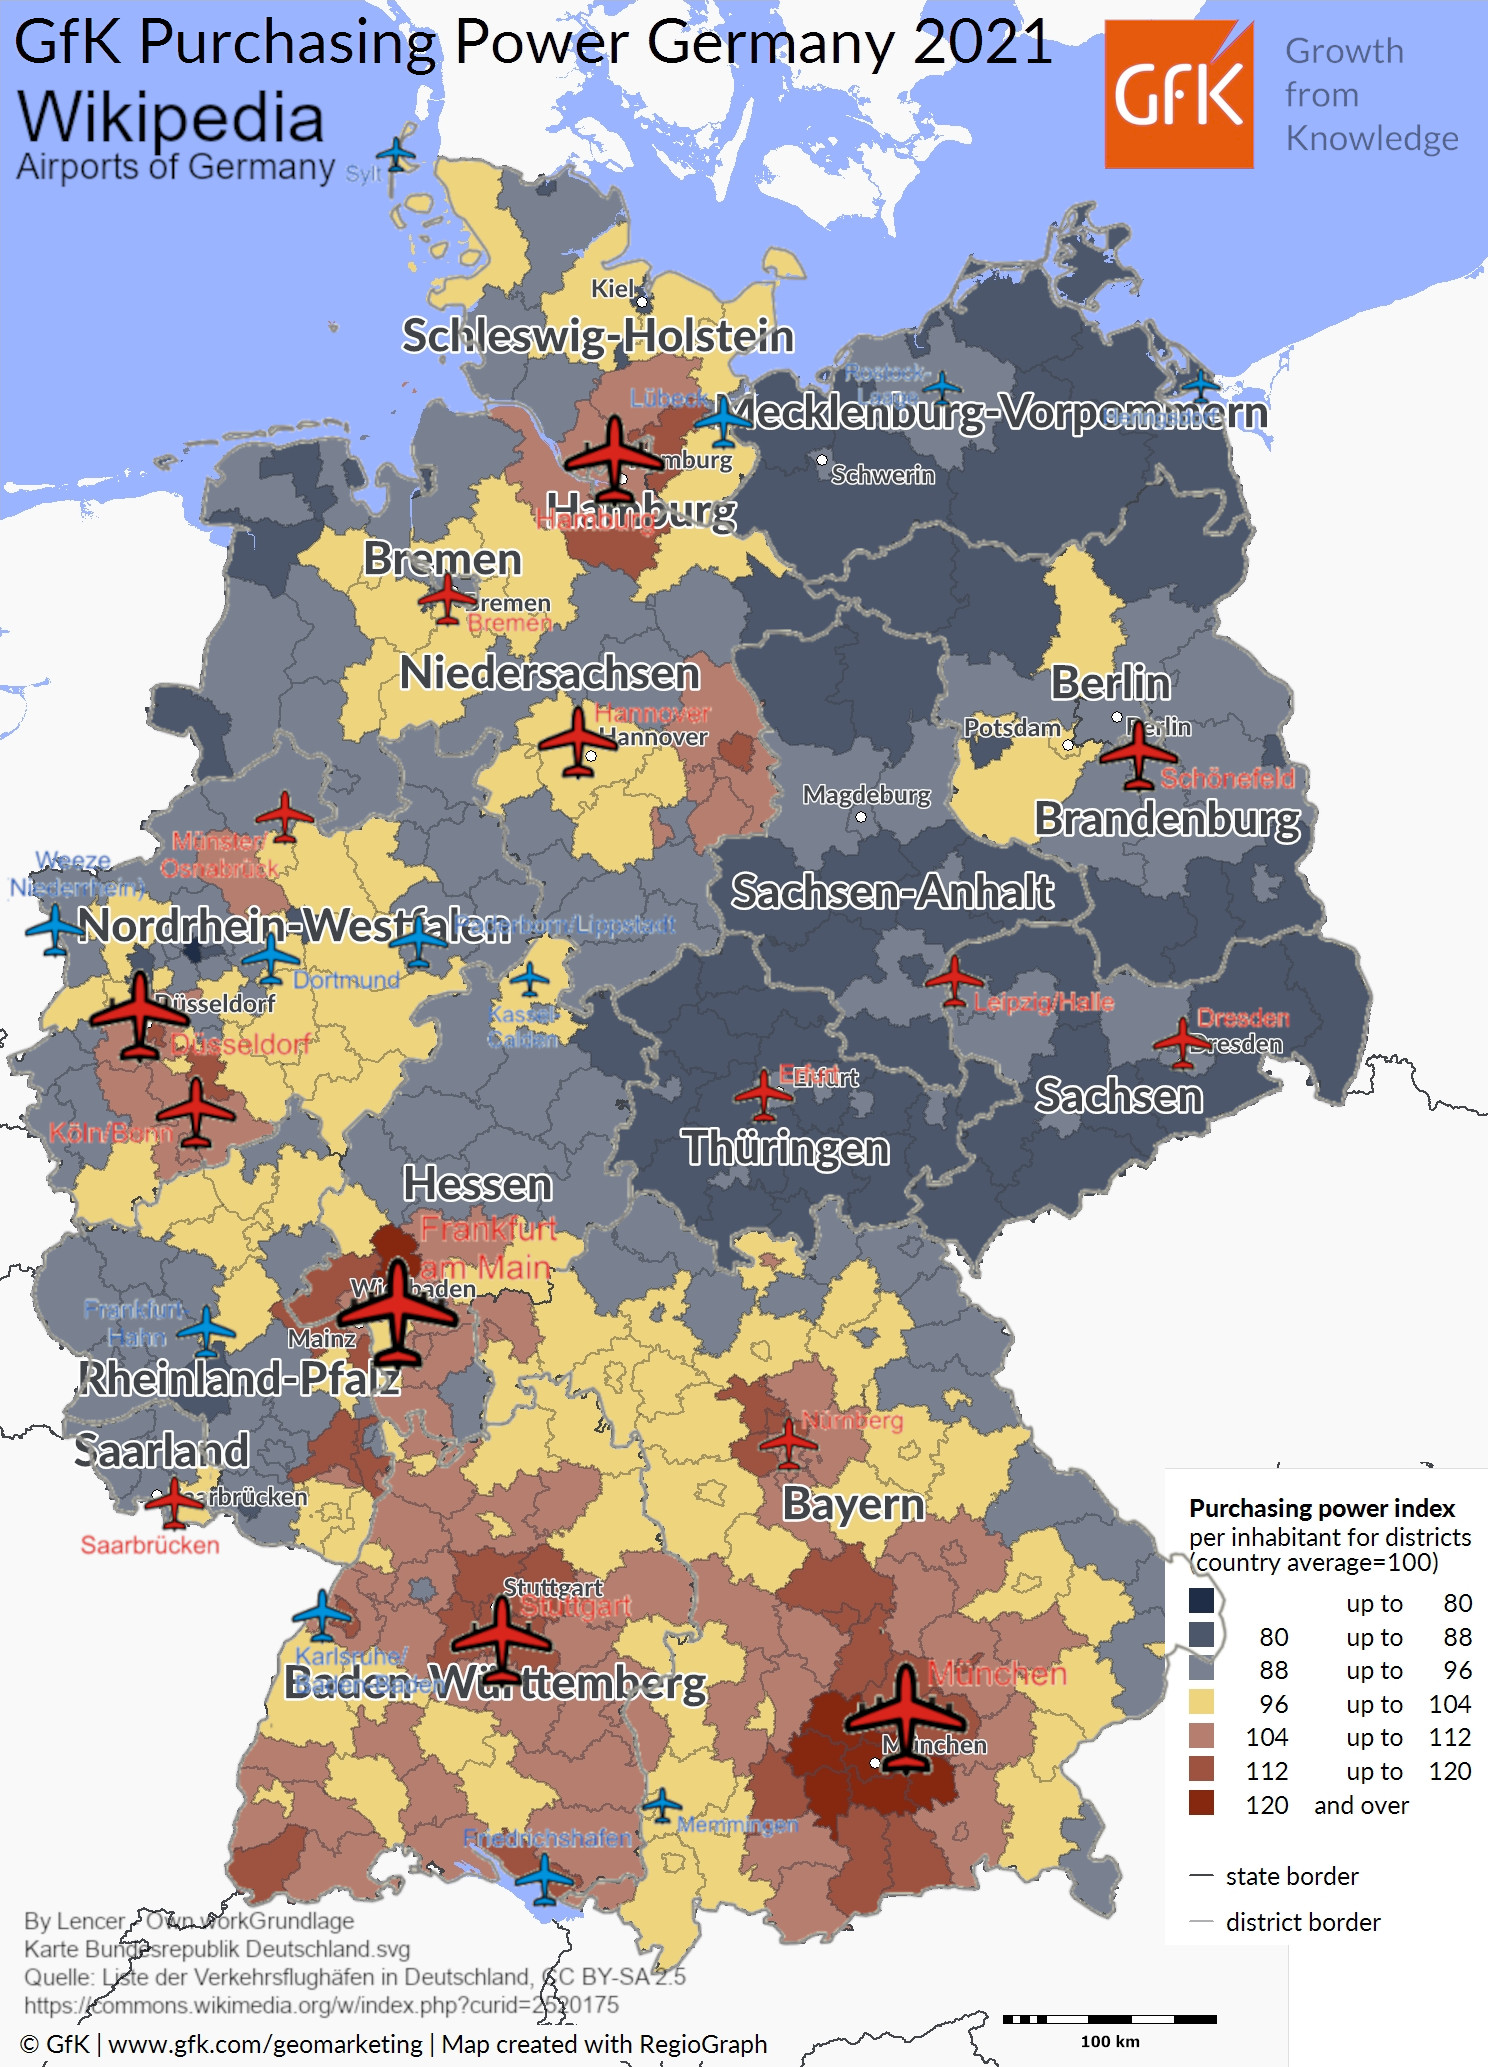 GFK Purchasing Power Germany vs. Airport Locations - 2021 Update